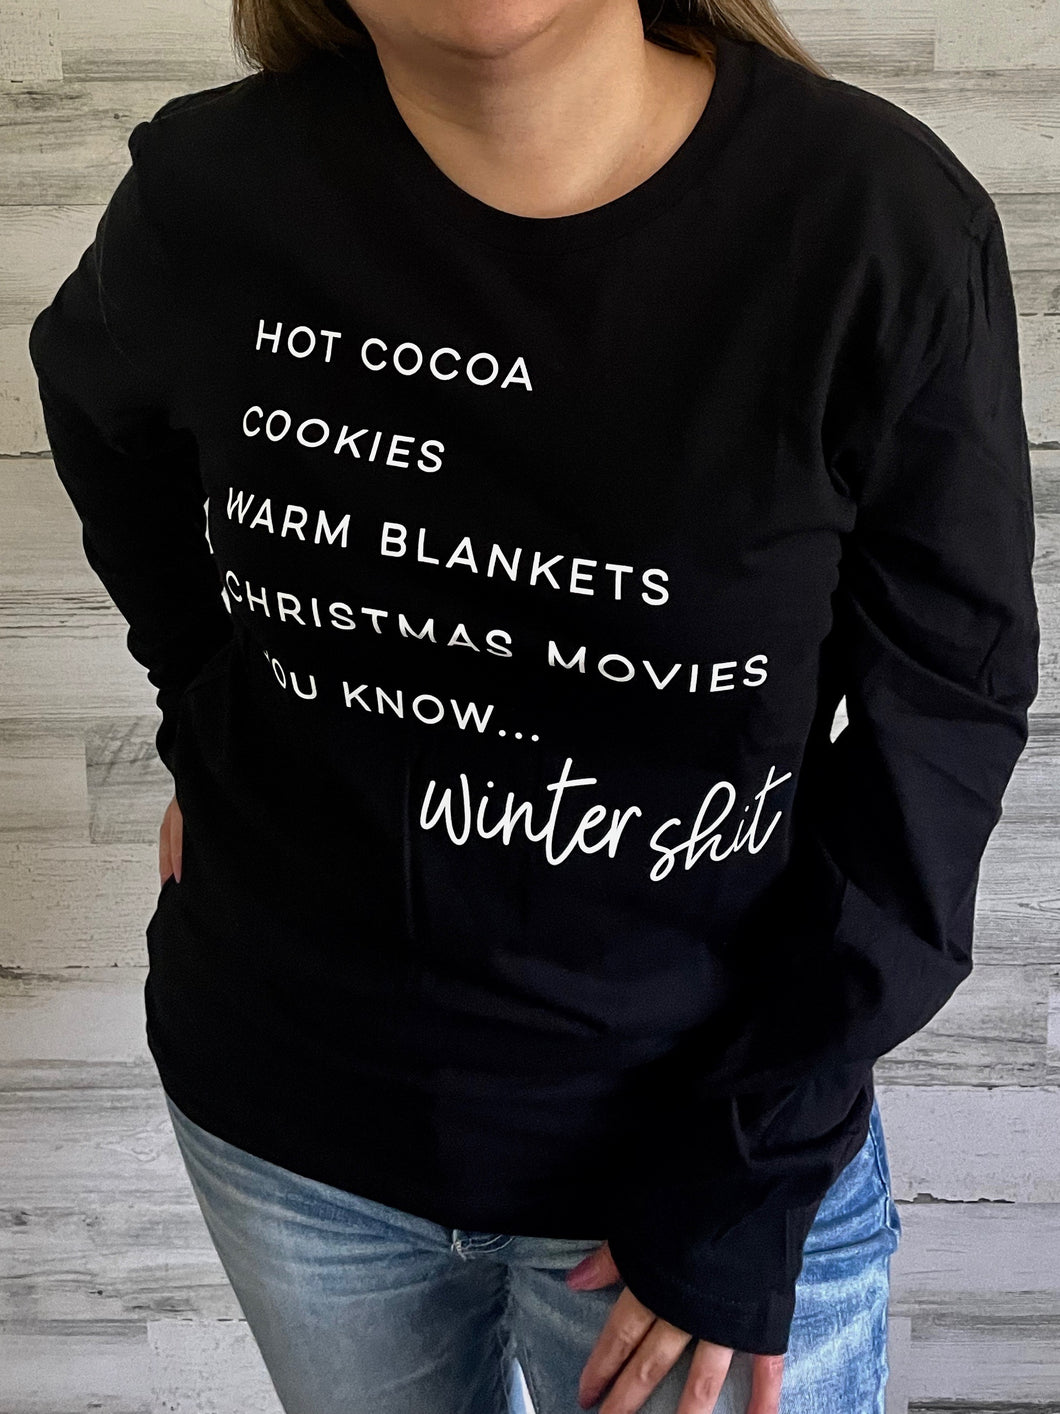 You Know Winter Sh*t (ONLY LARGE LEFT)